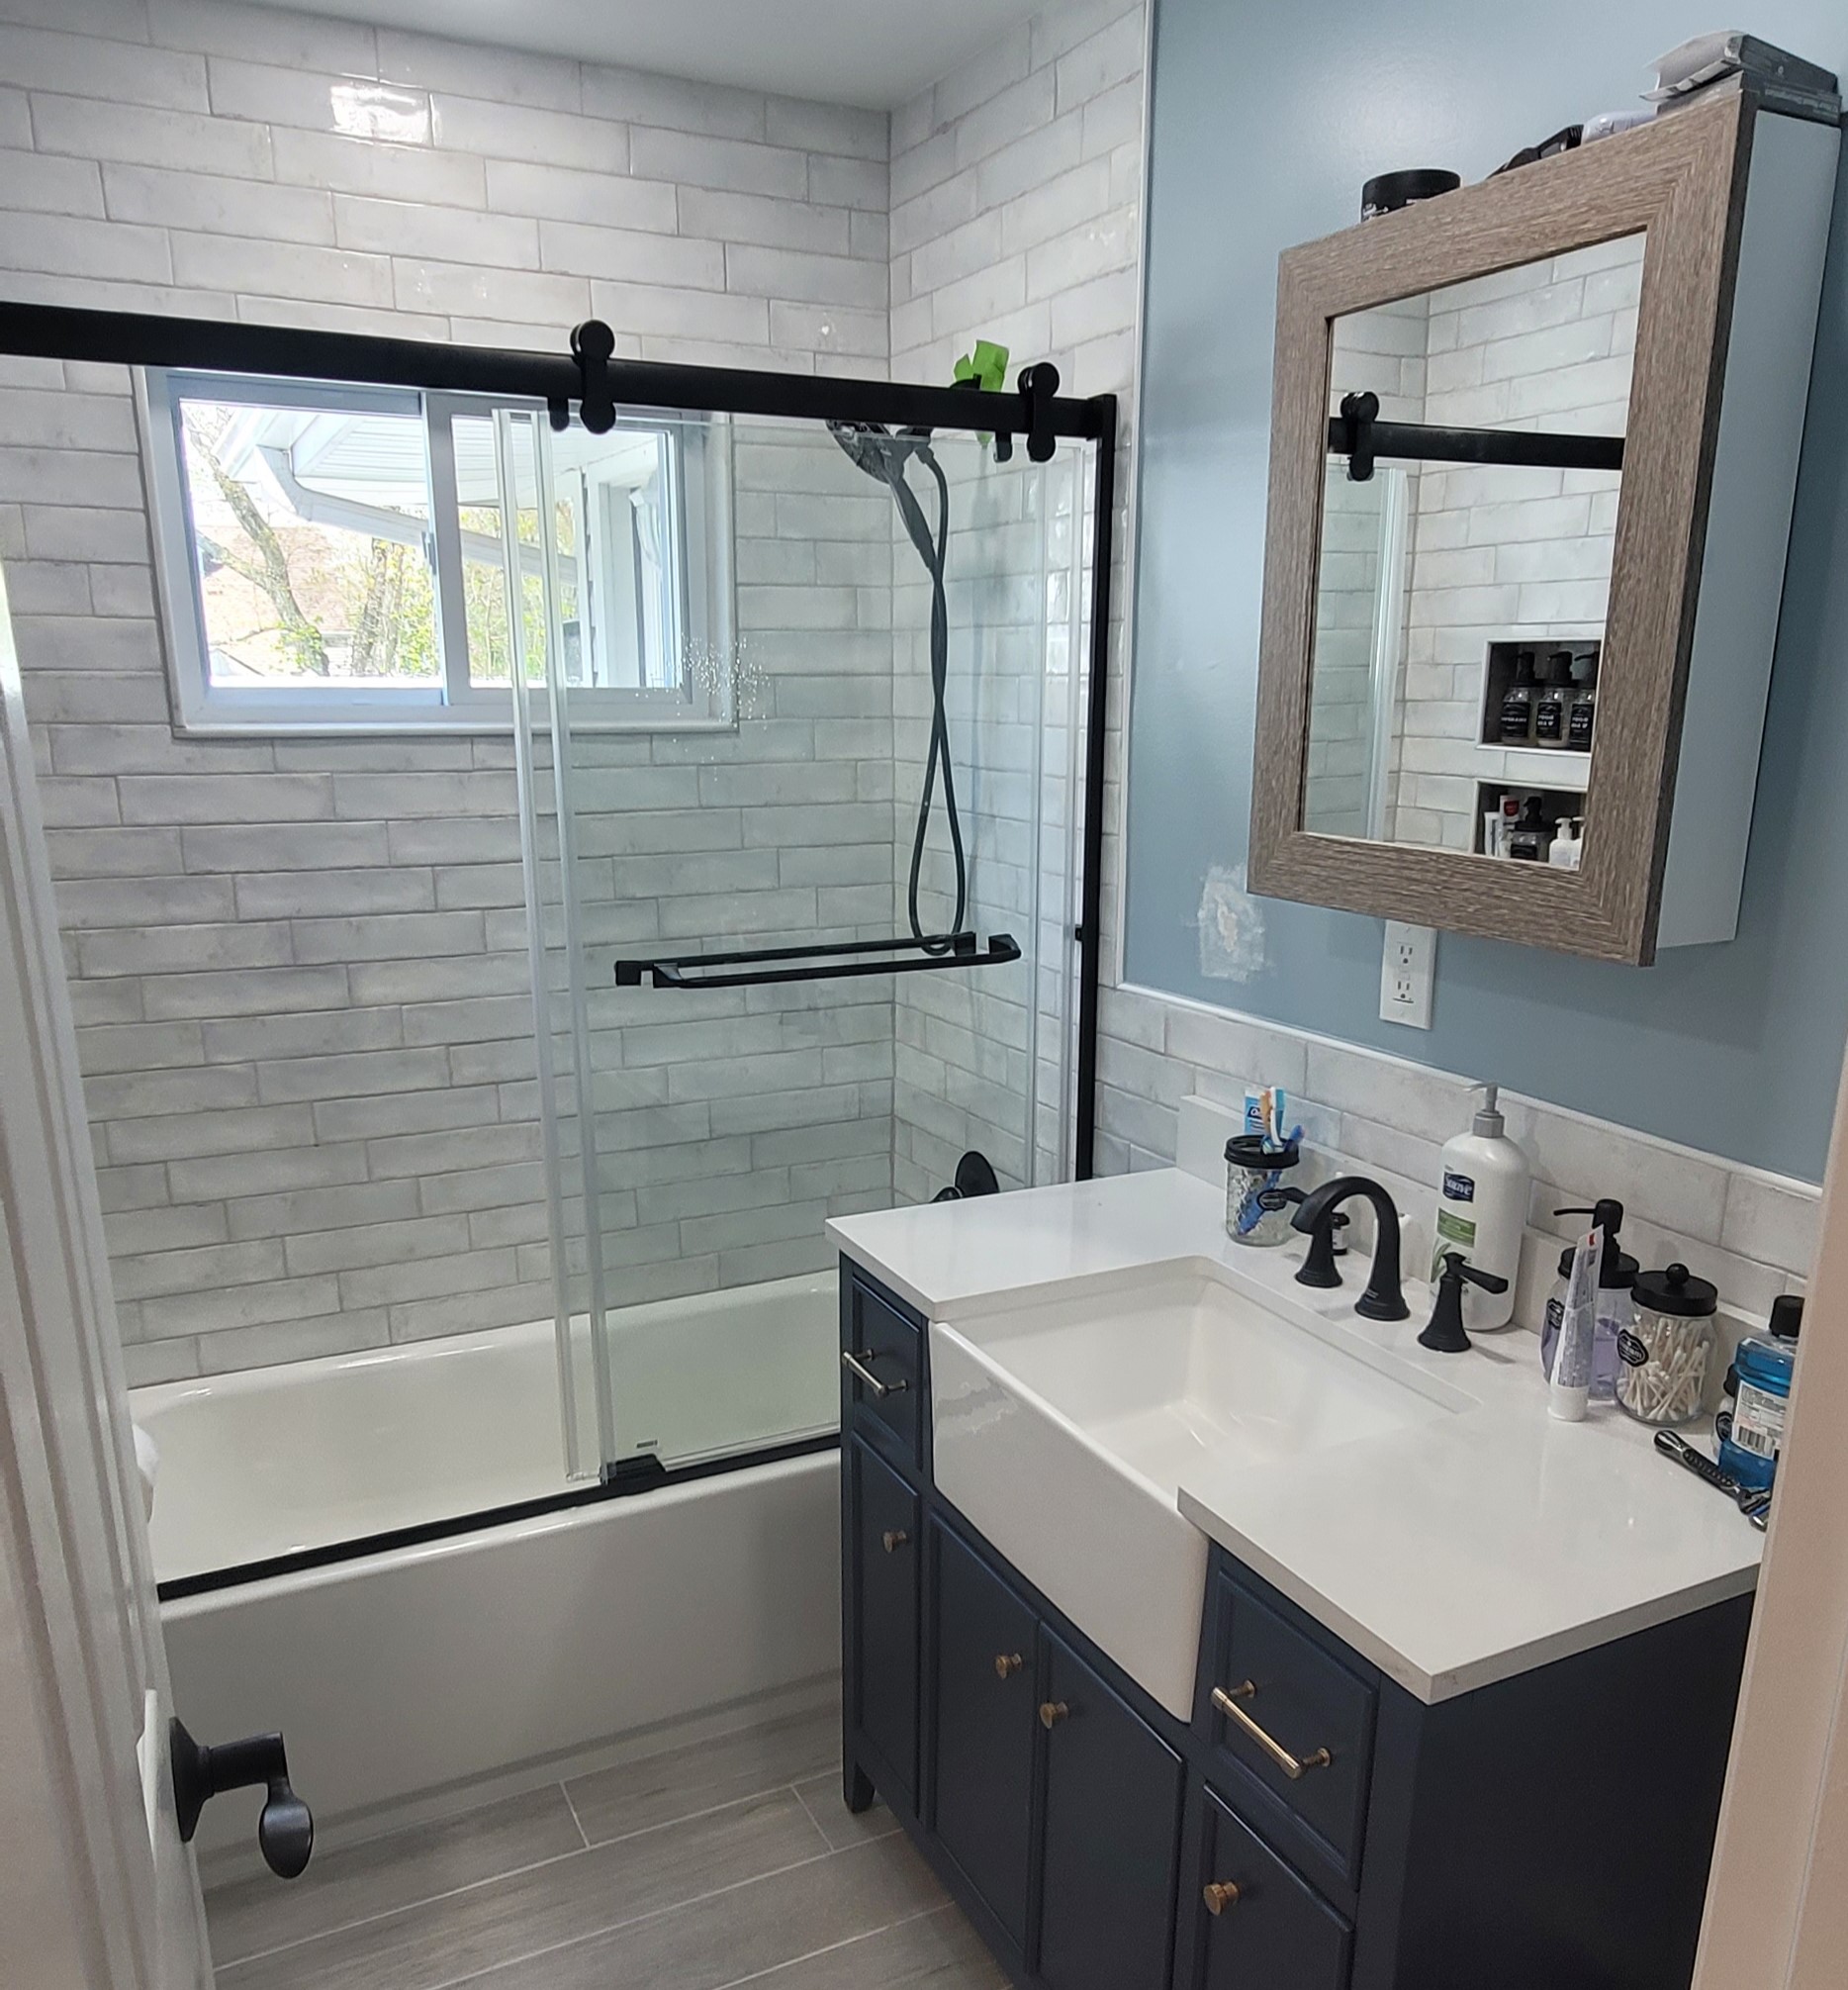 Bathroom remodel finished project.